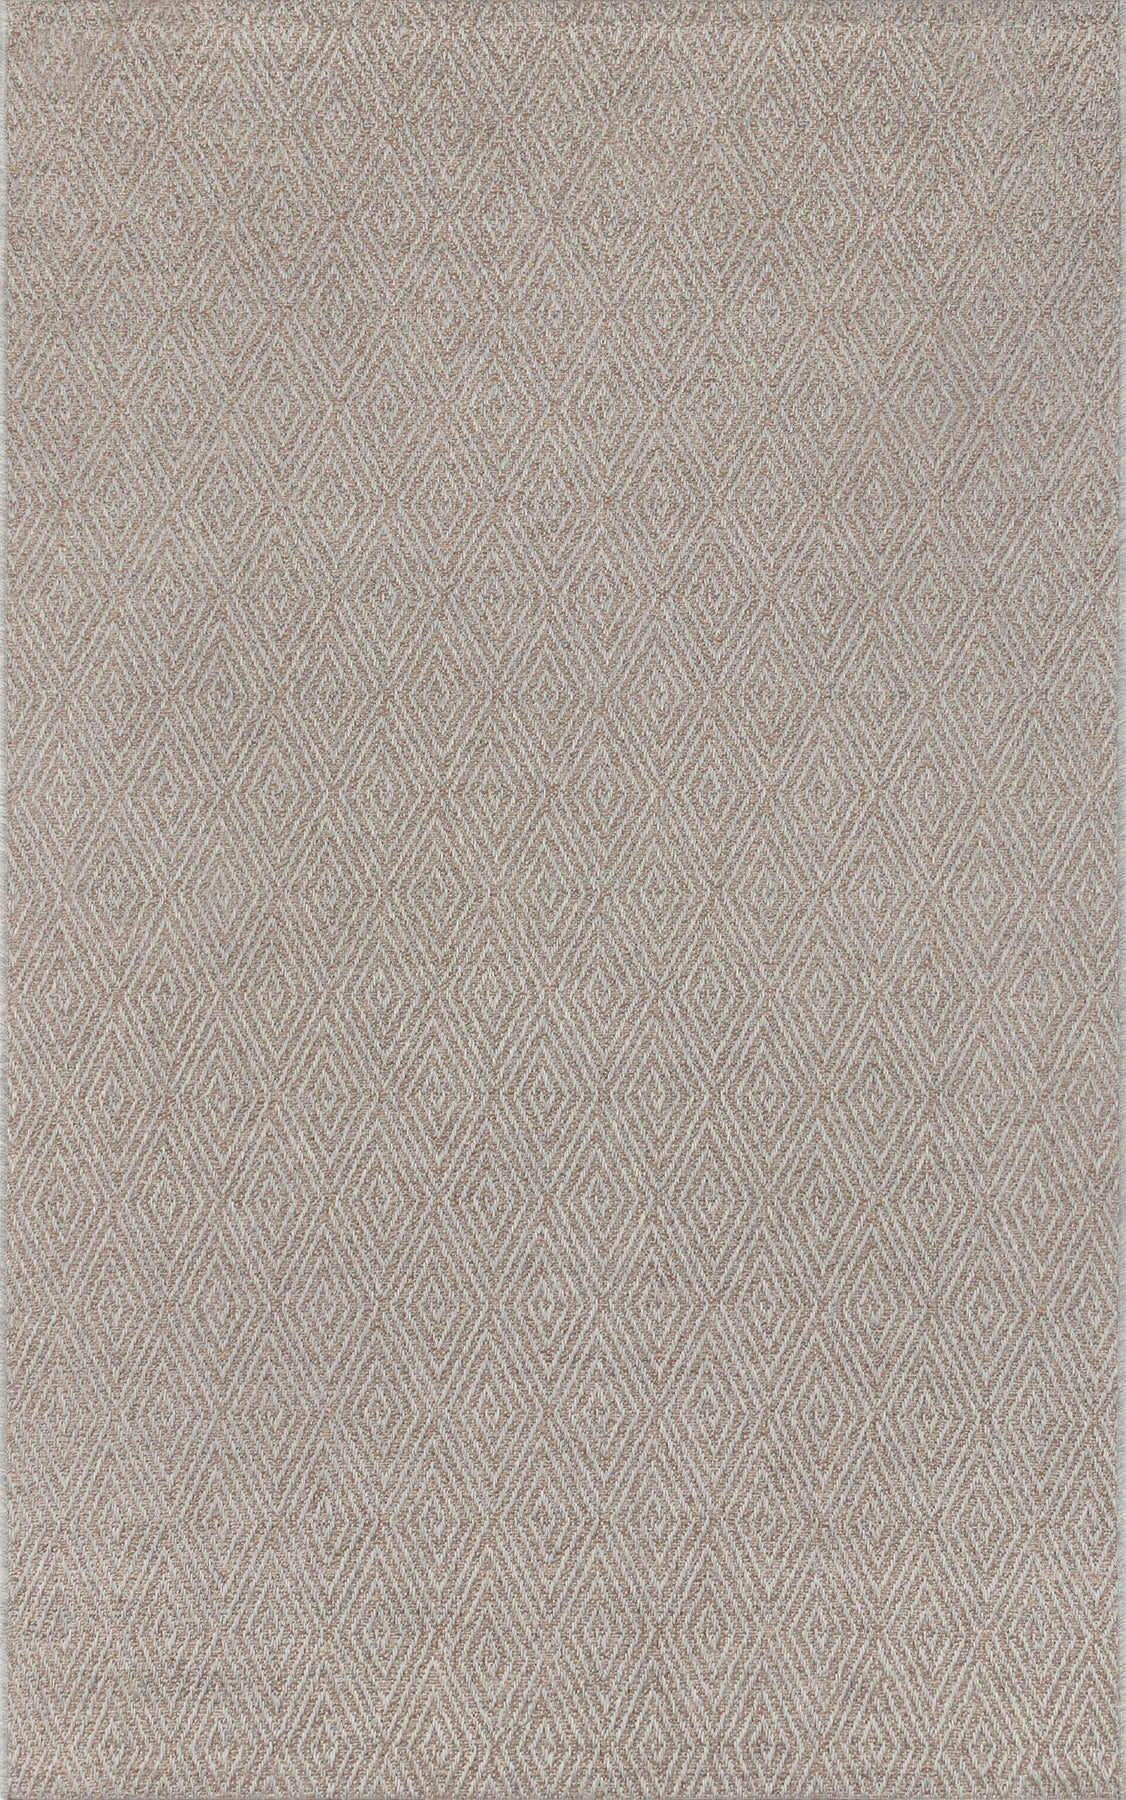 Momeni Downeast DOW-6 Natural Area Rug by Erin Gates